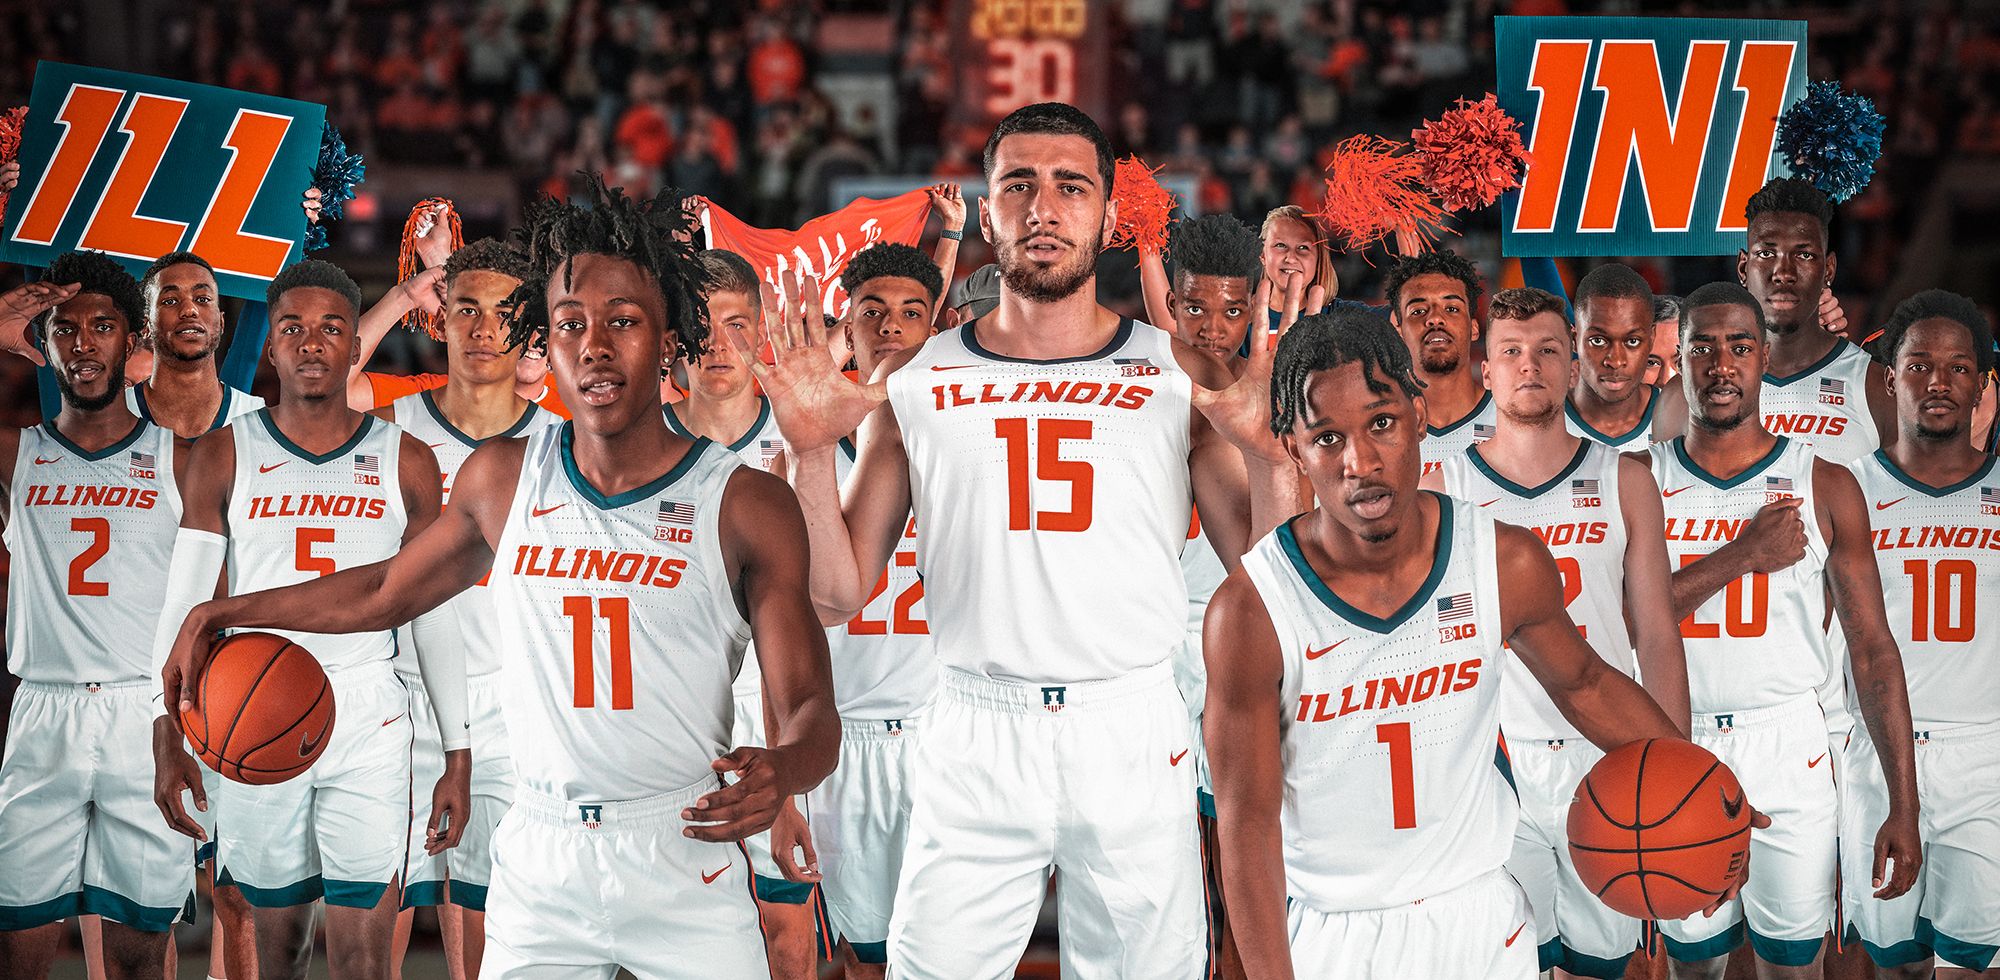 Men's Basketball Posters Now Available of Illinois Athletics